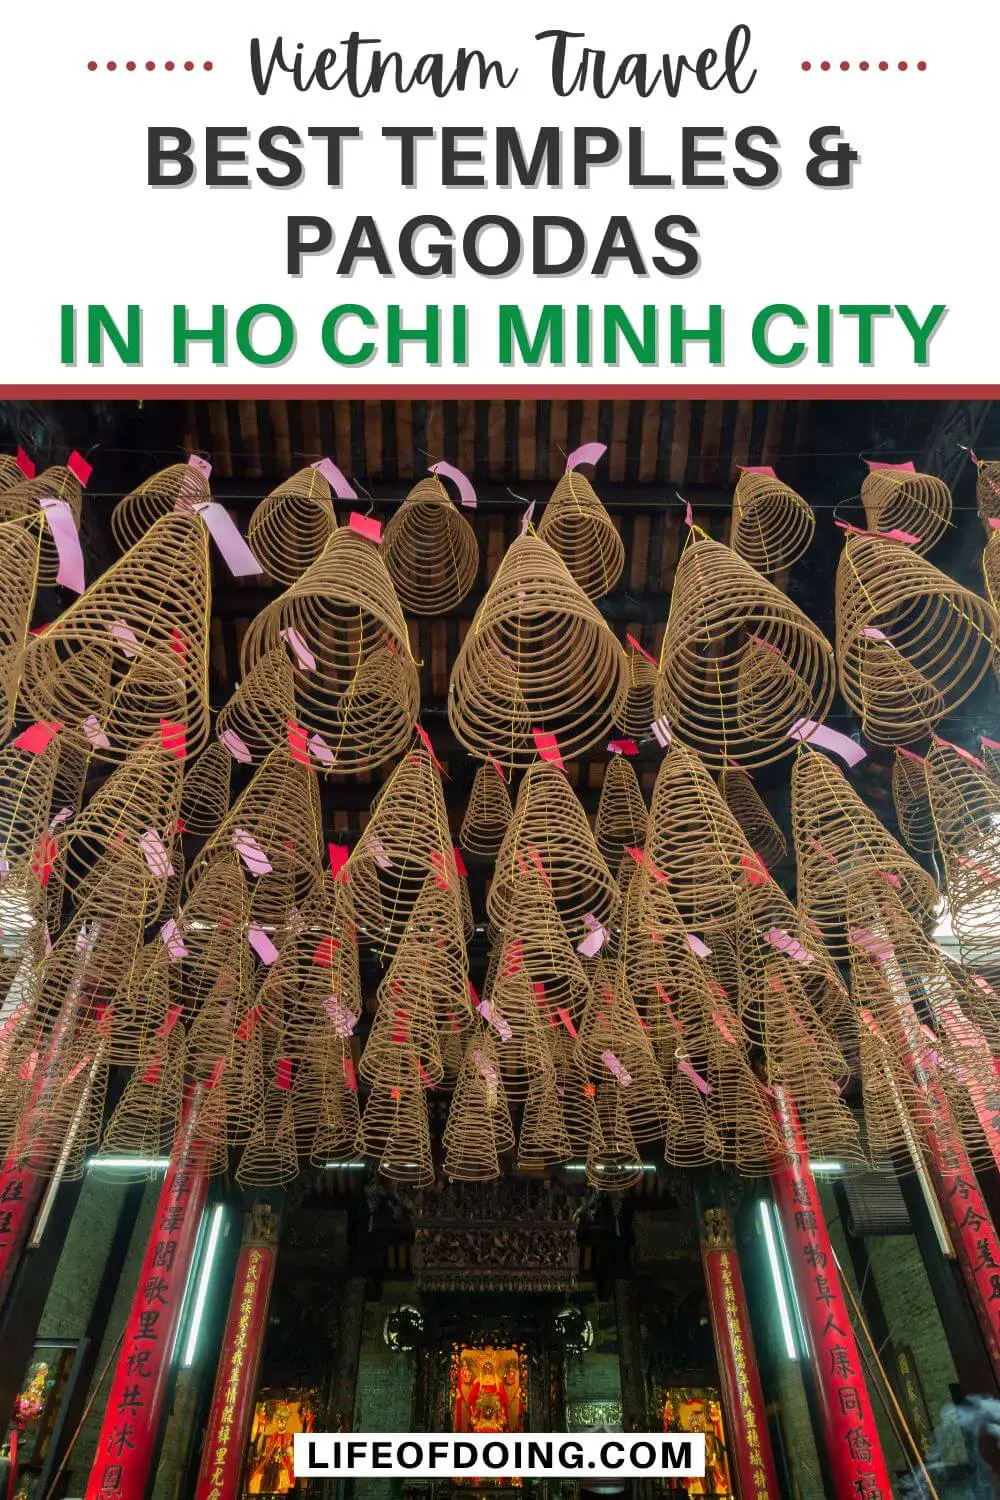 Coiled incenses hanging from the ceiling of Thien Hau Temple in Ho Chi Minh City, Vietnam